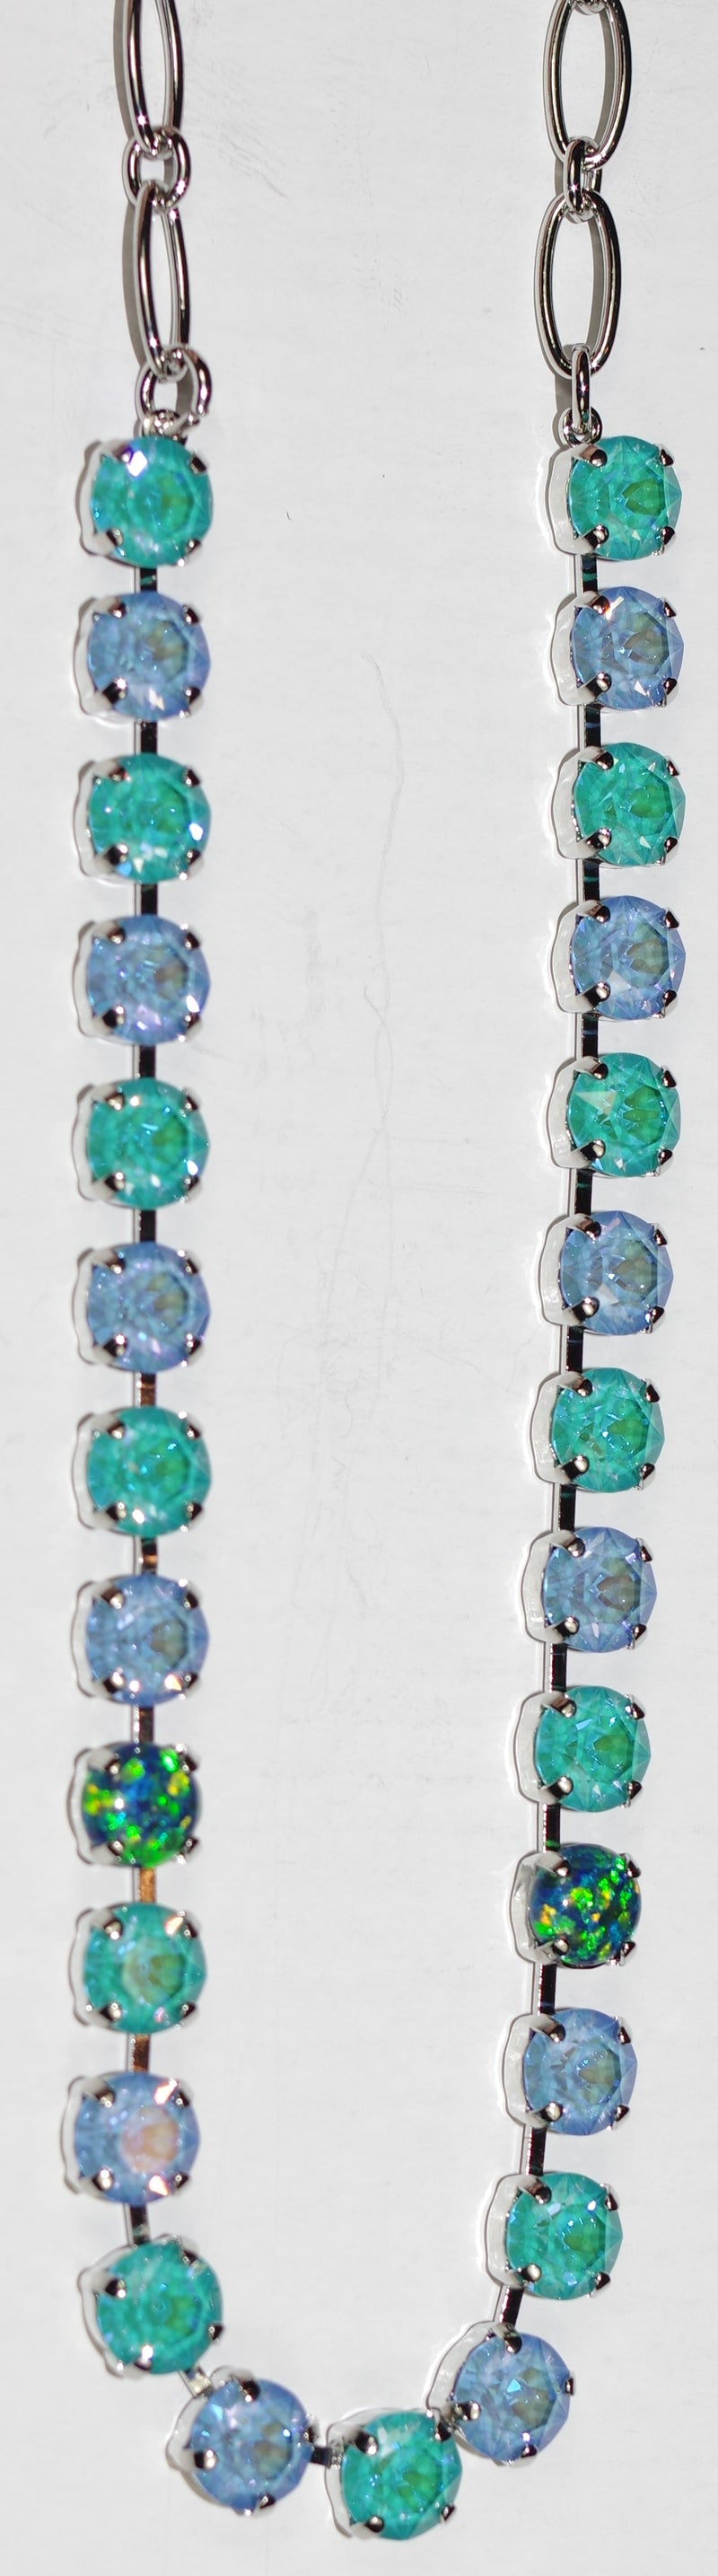 MARIANA NECKLACE BETTE SUN KISSED: blue, teal, simulated opal 1/4" stones in rhodium setting, 17" adjustable chain